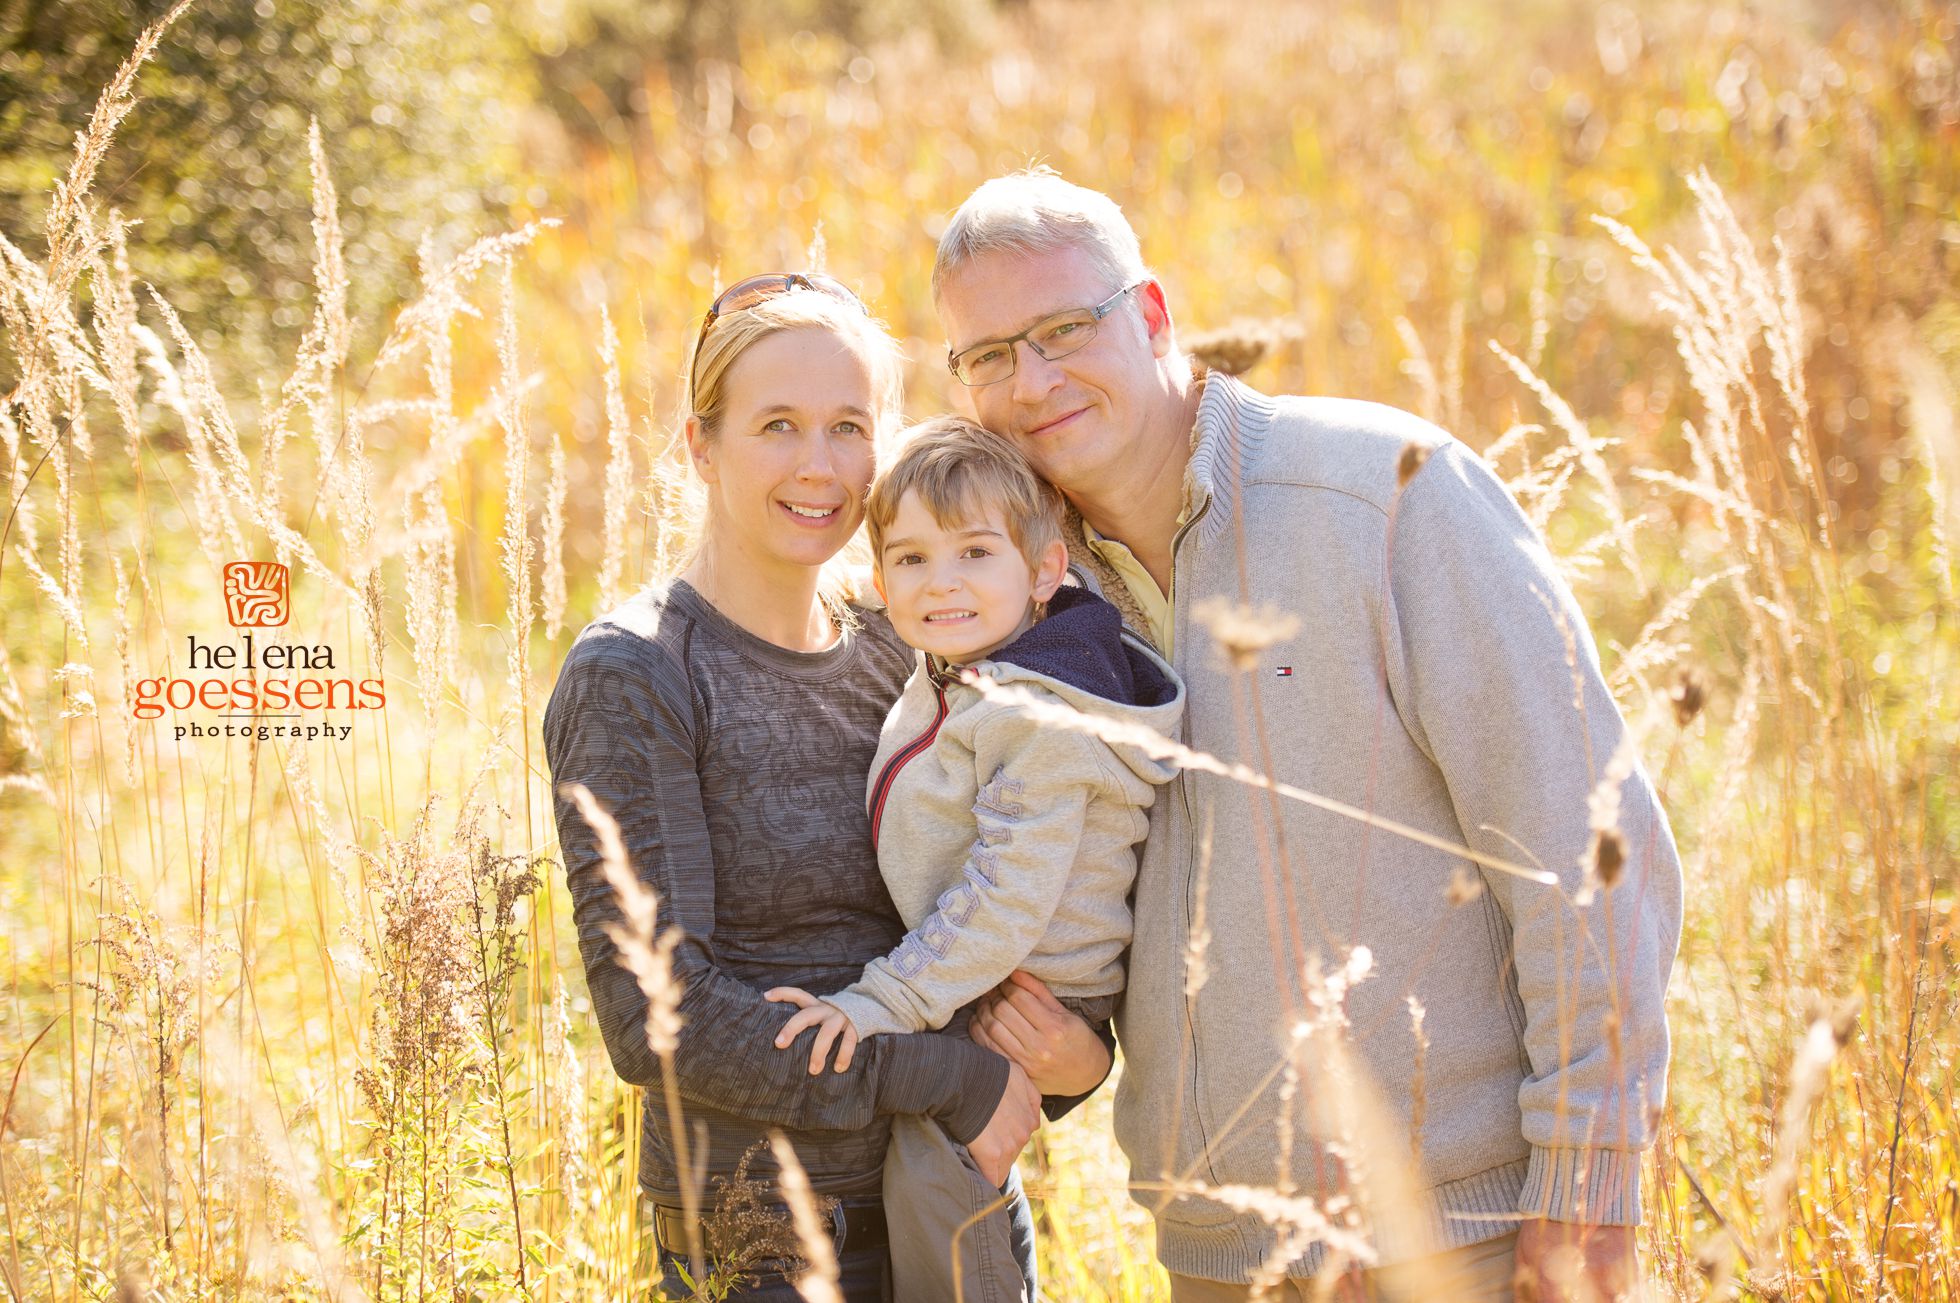 A family portrait session in a sunny tall grass field